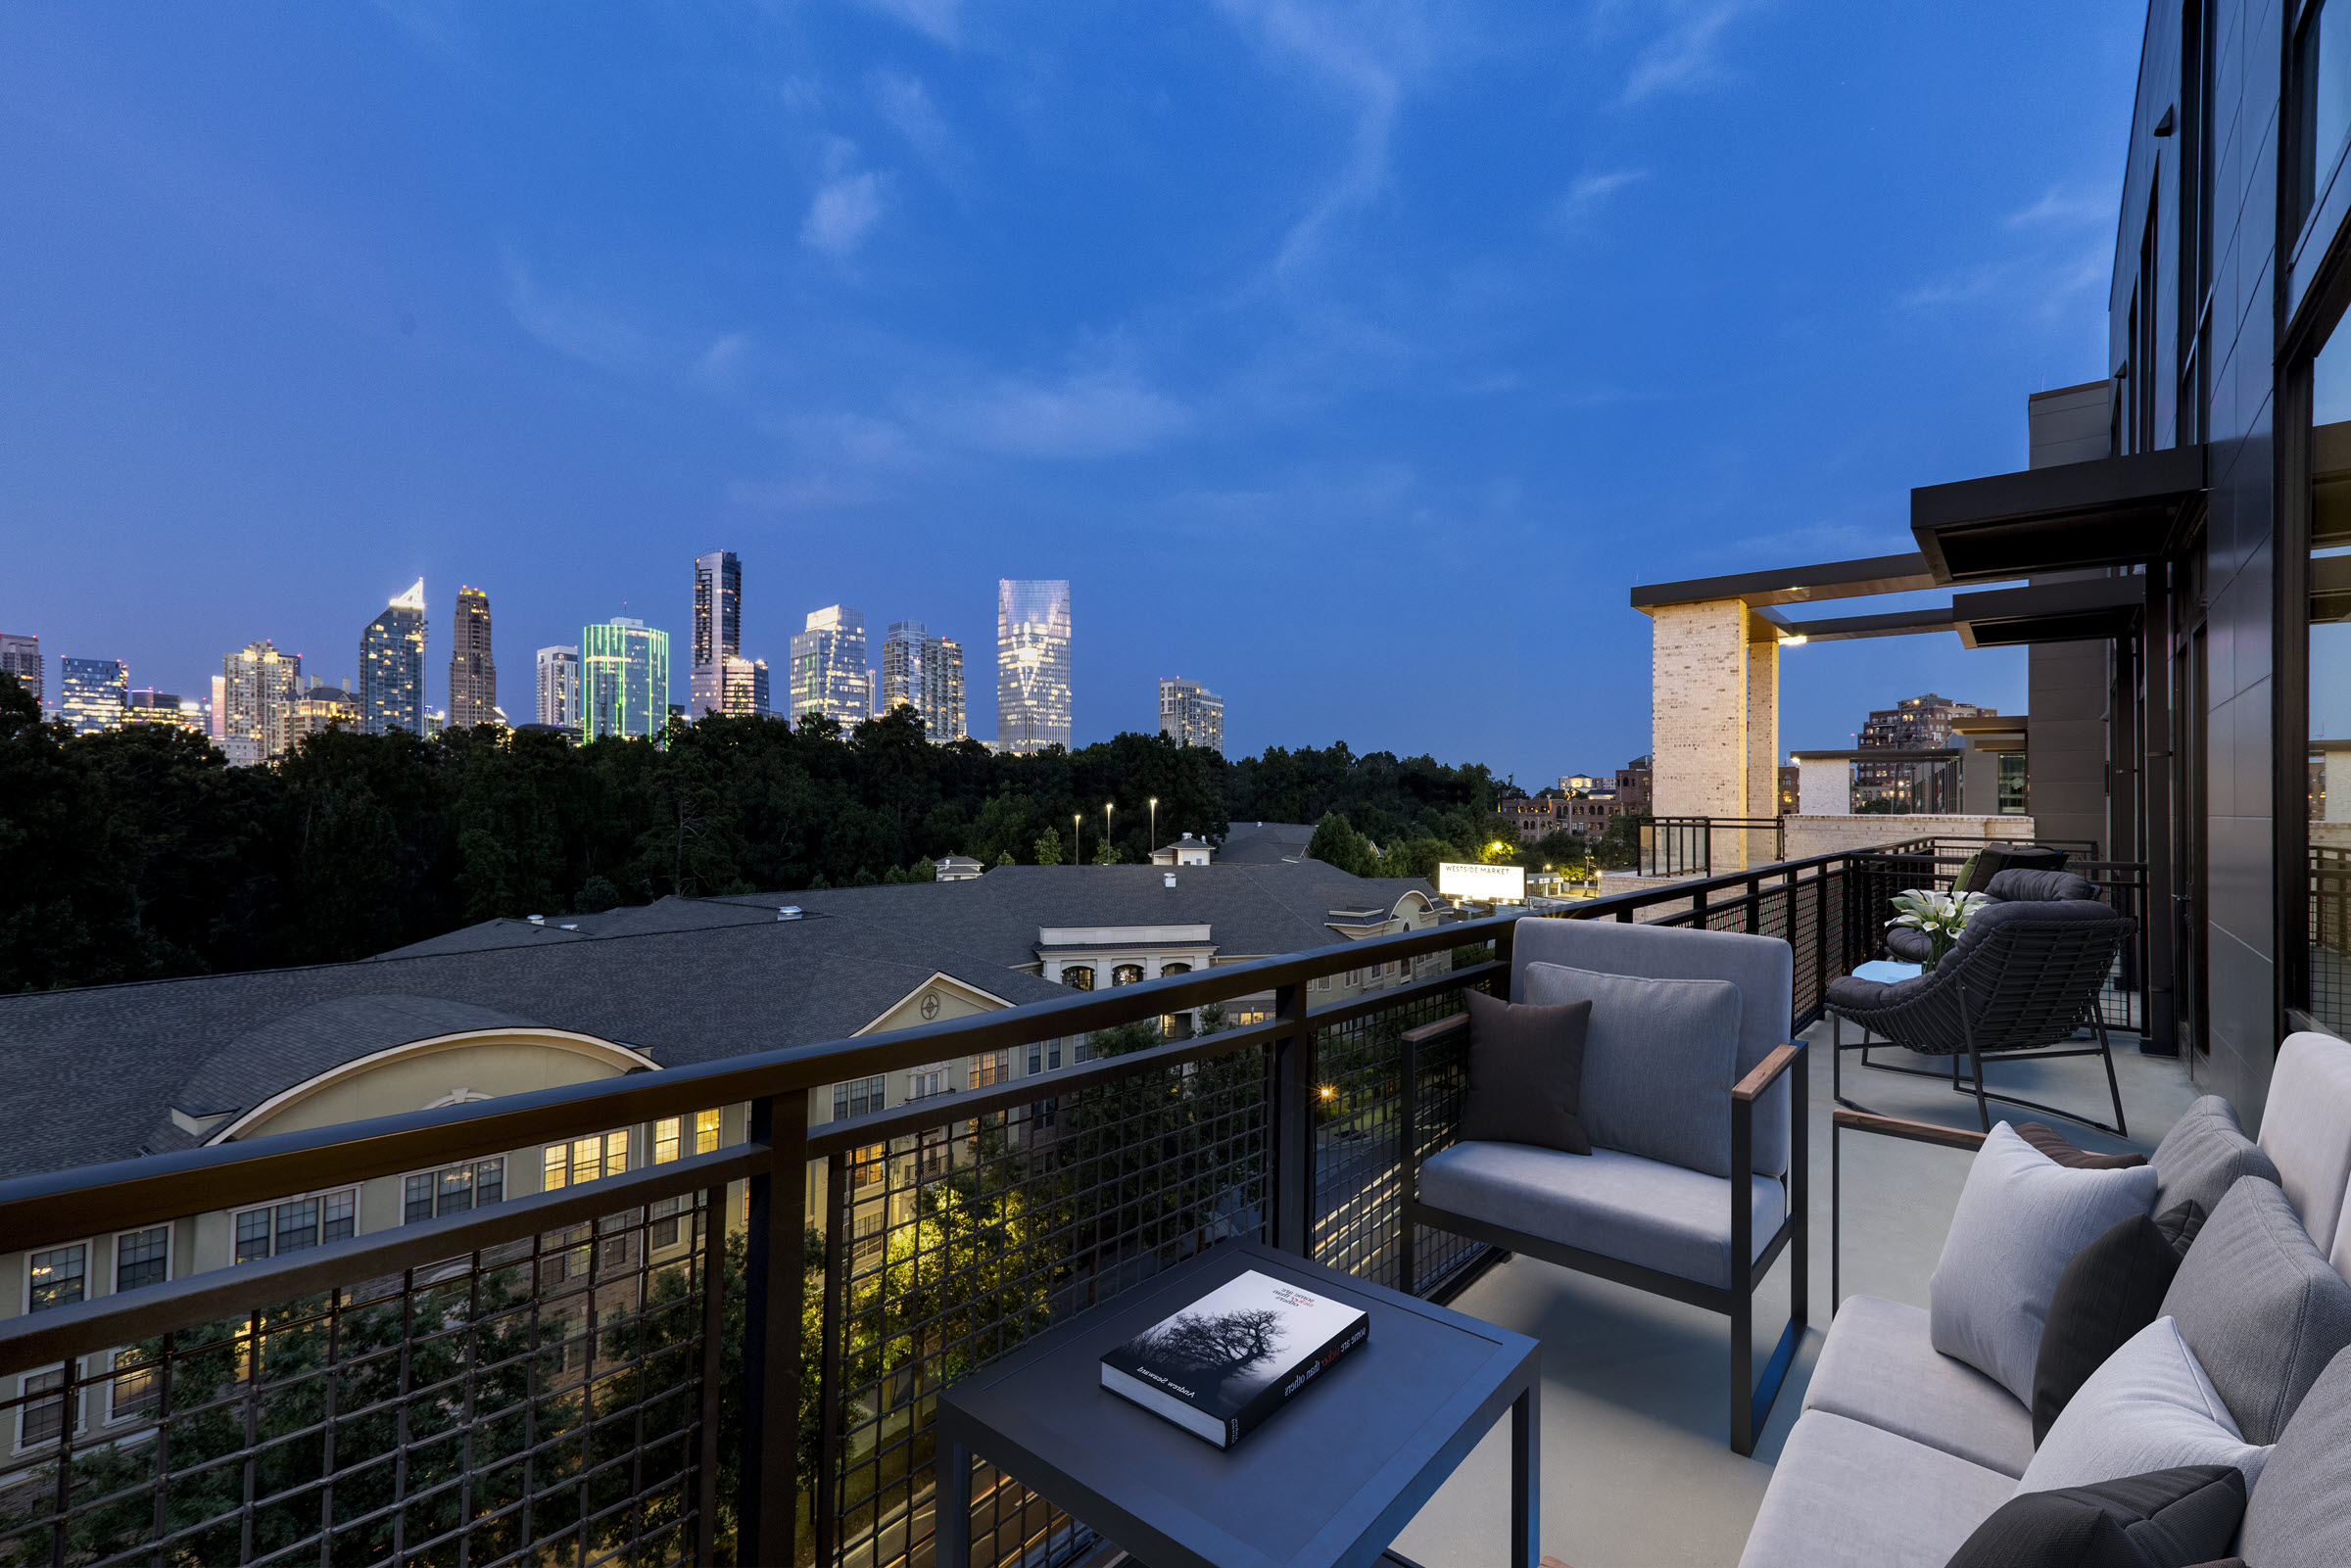 Penthouse apartment balcony with city skyline views